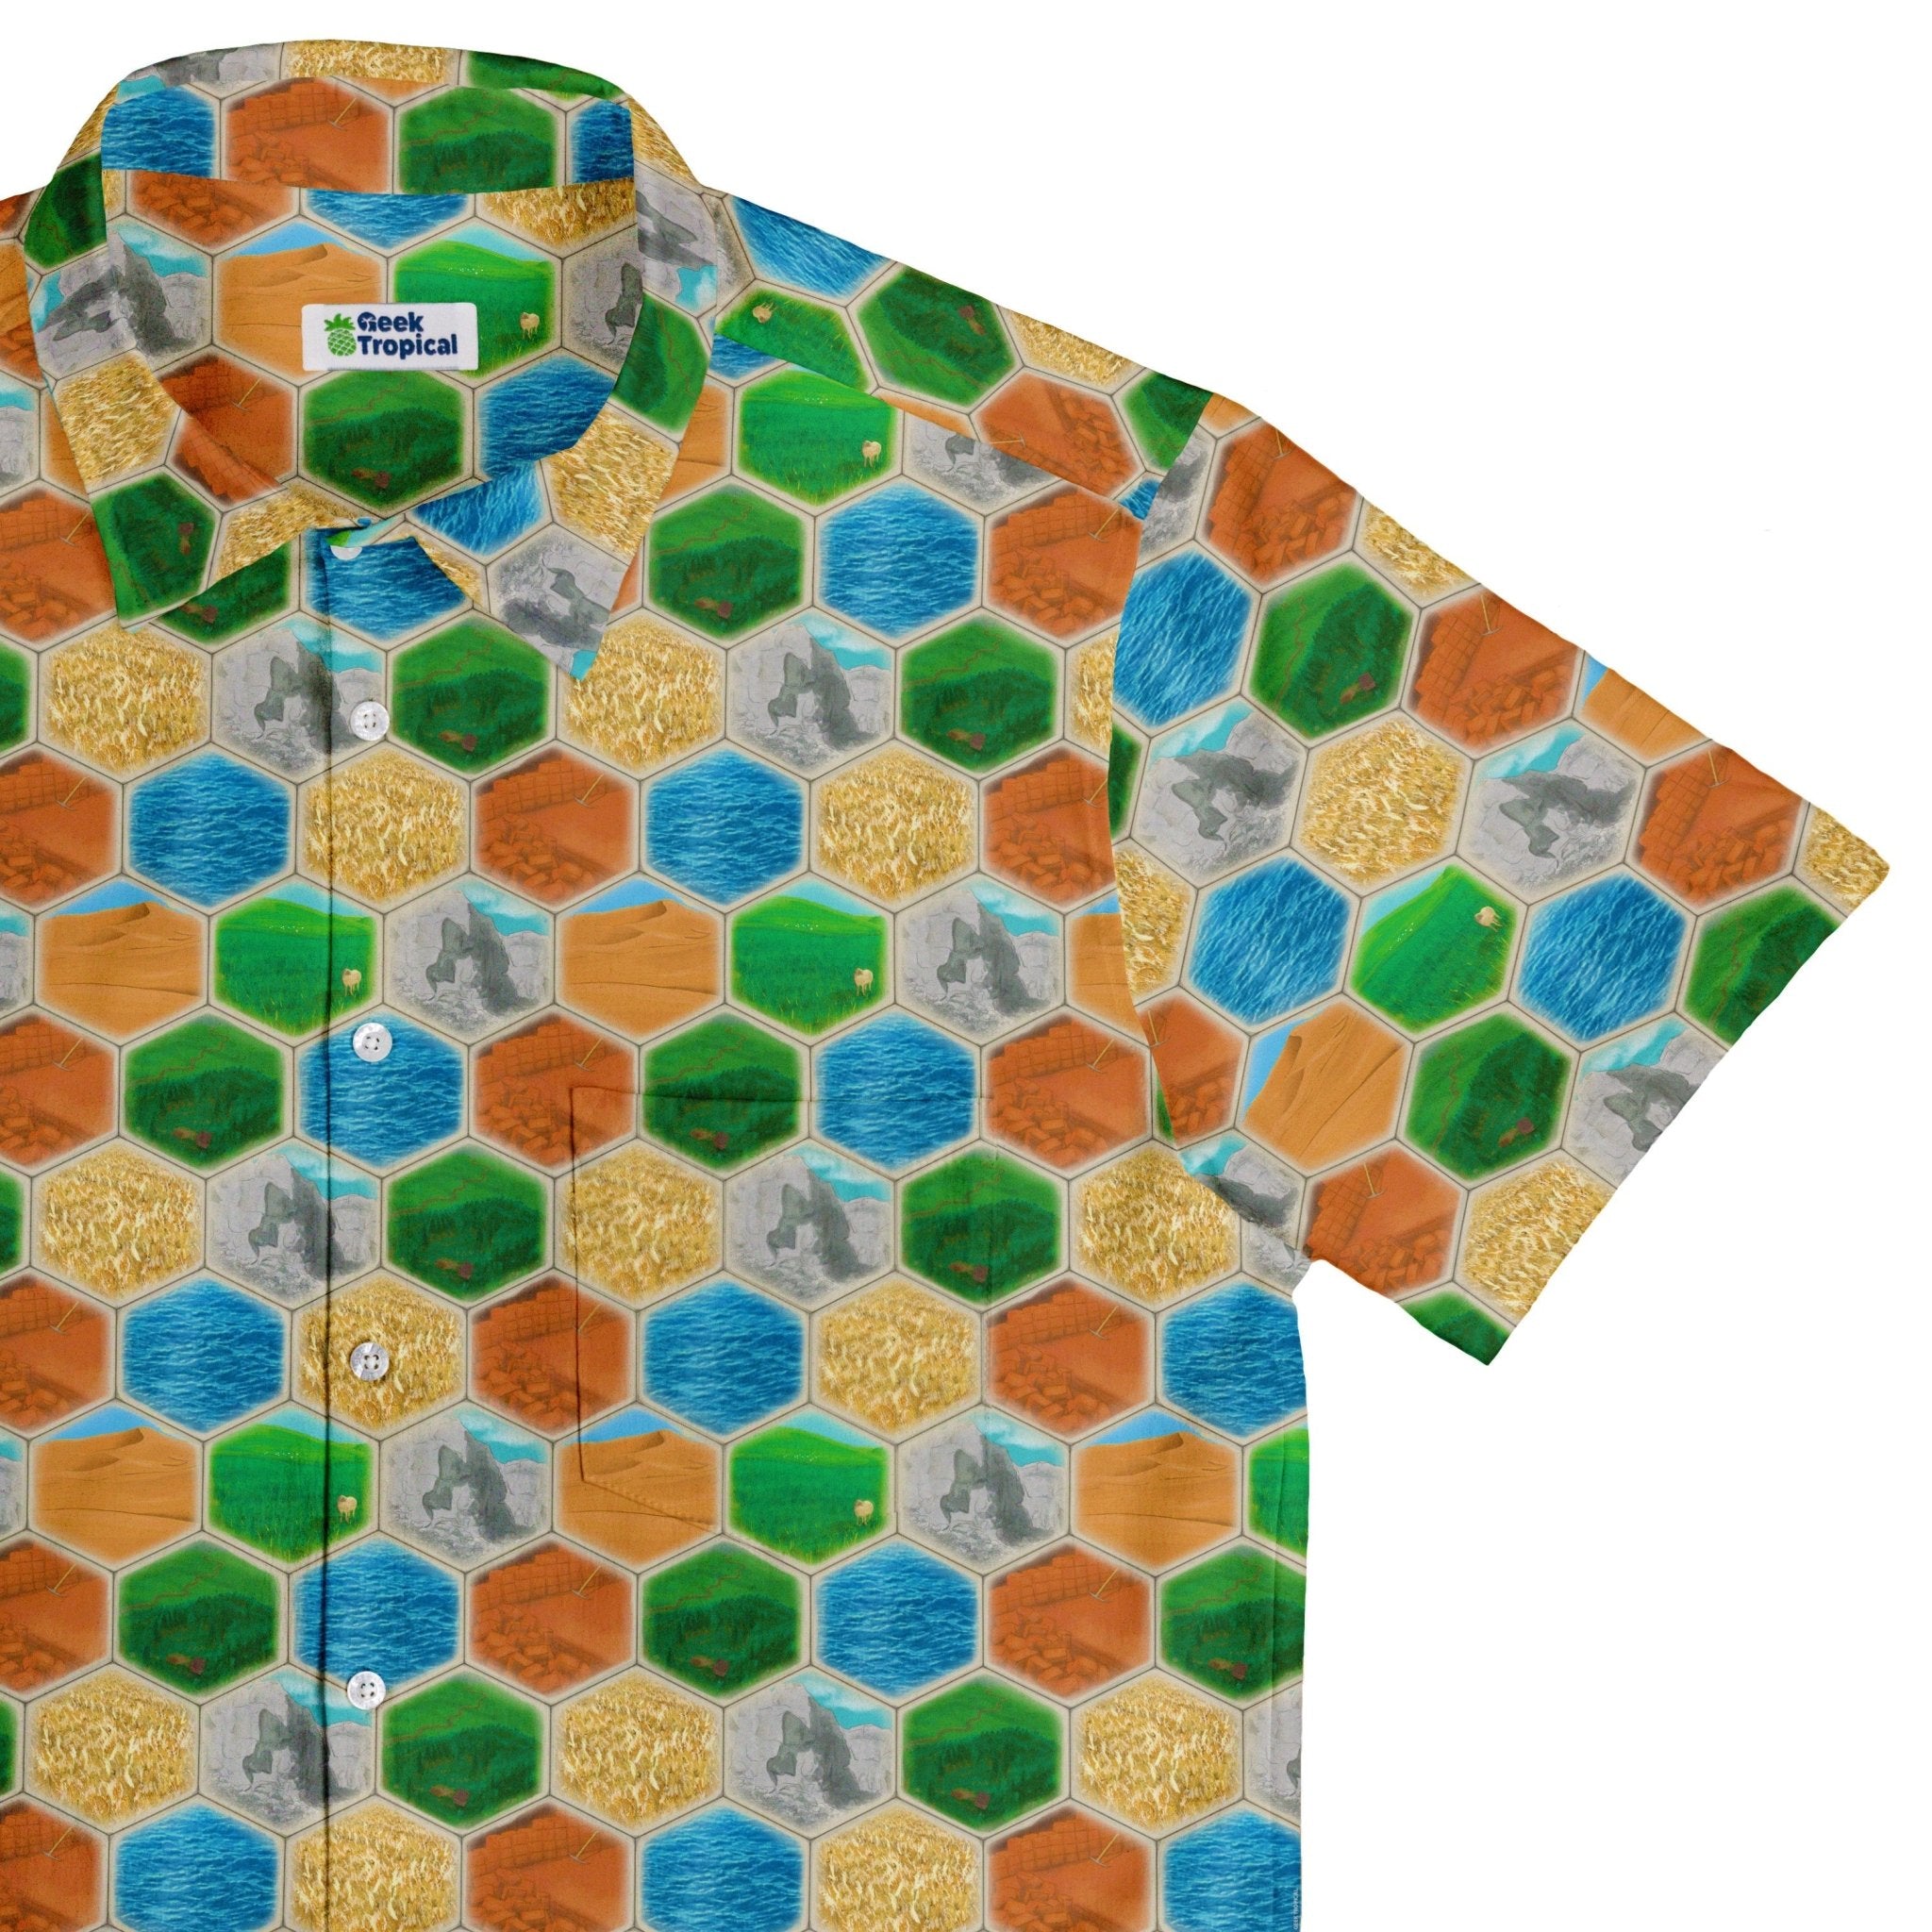 Hexagon Tile Board Game Button Up Shirt - adult sizing - board game print - Designs by Nathan